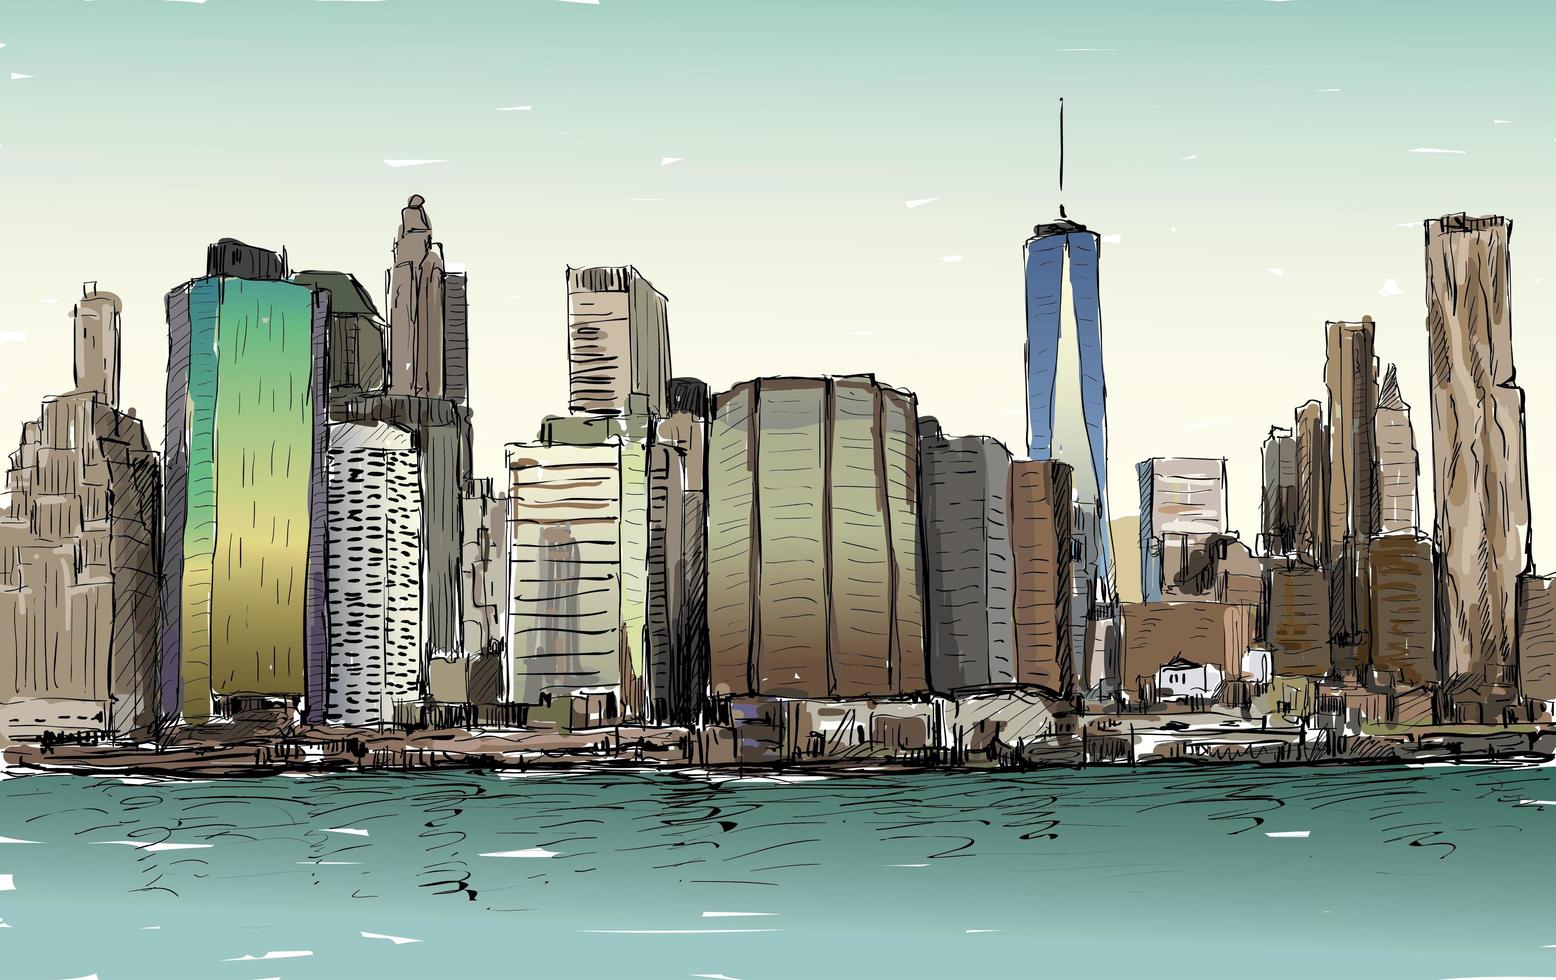 Color sketch of New York City cityscape with skyscrapers